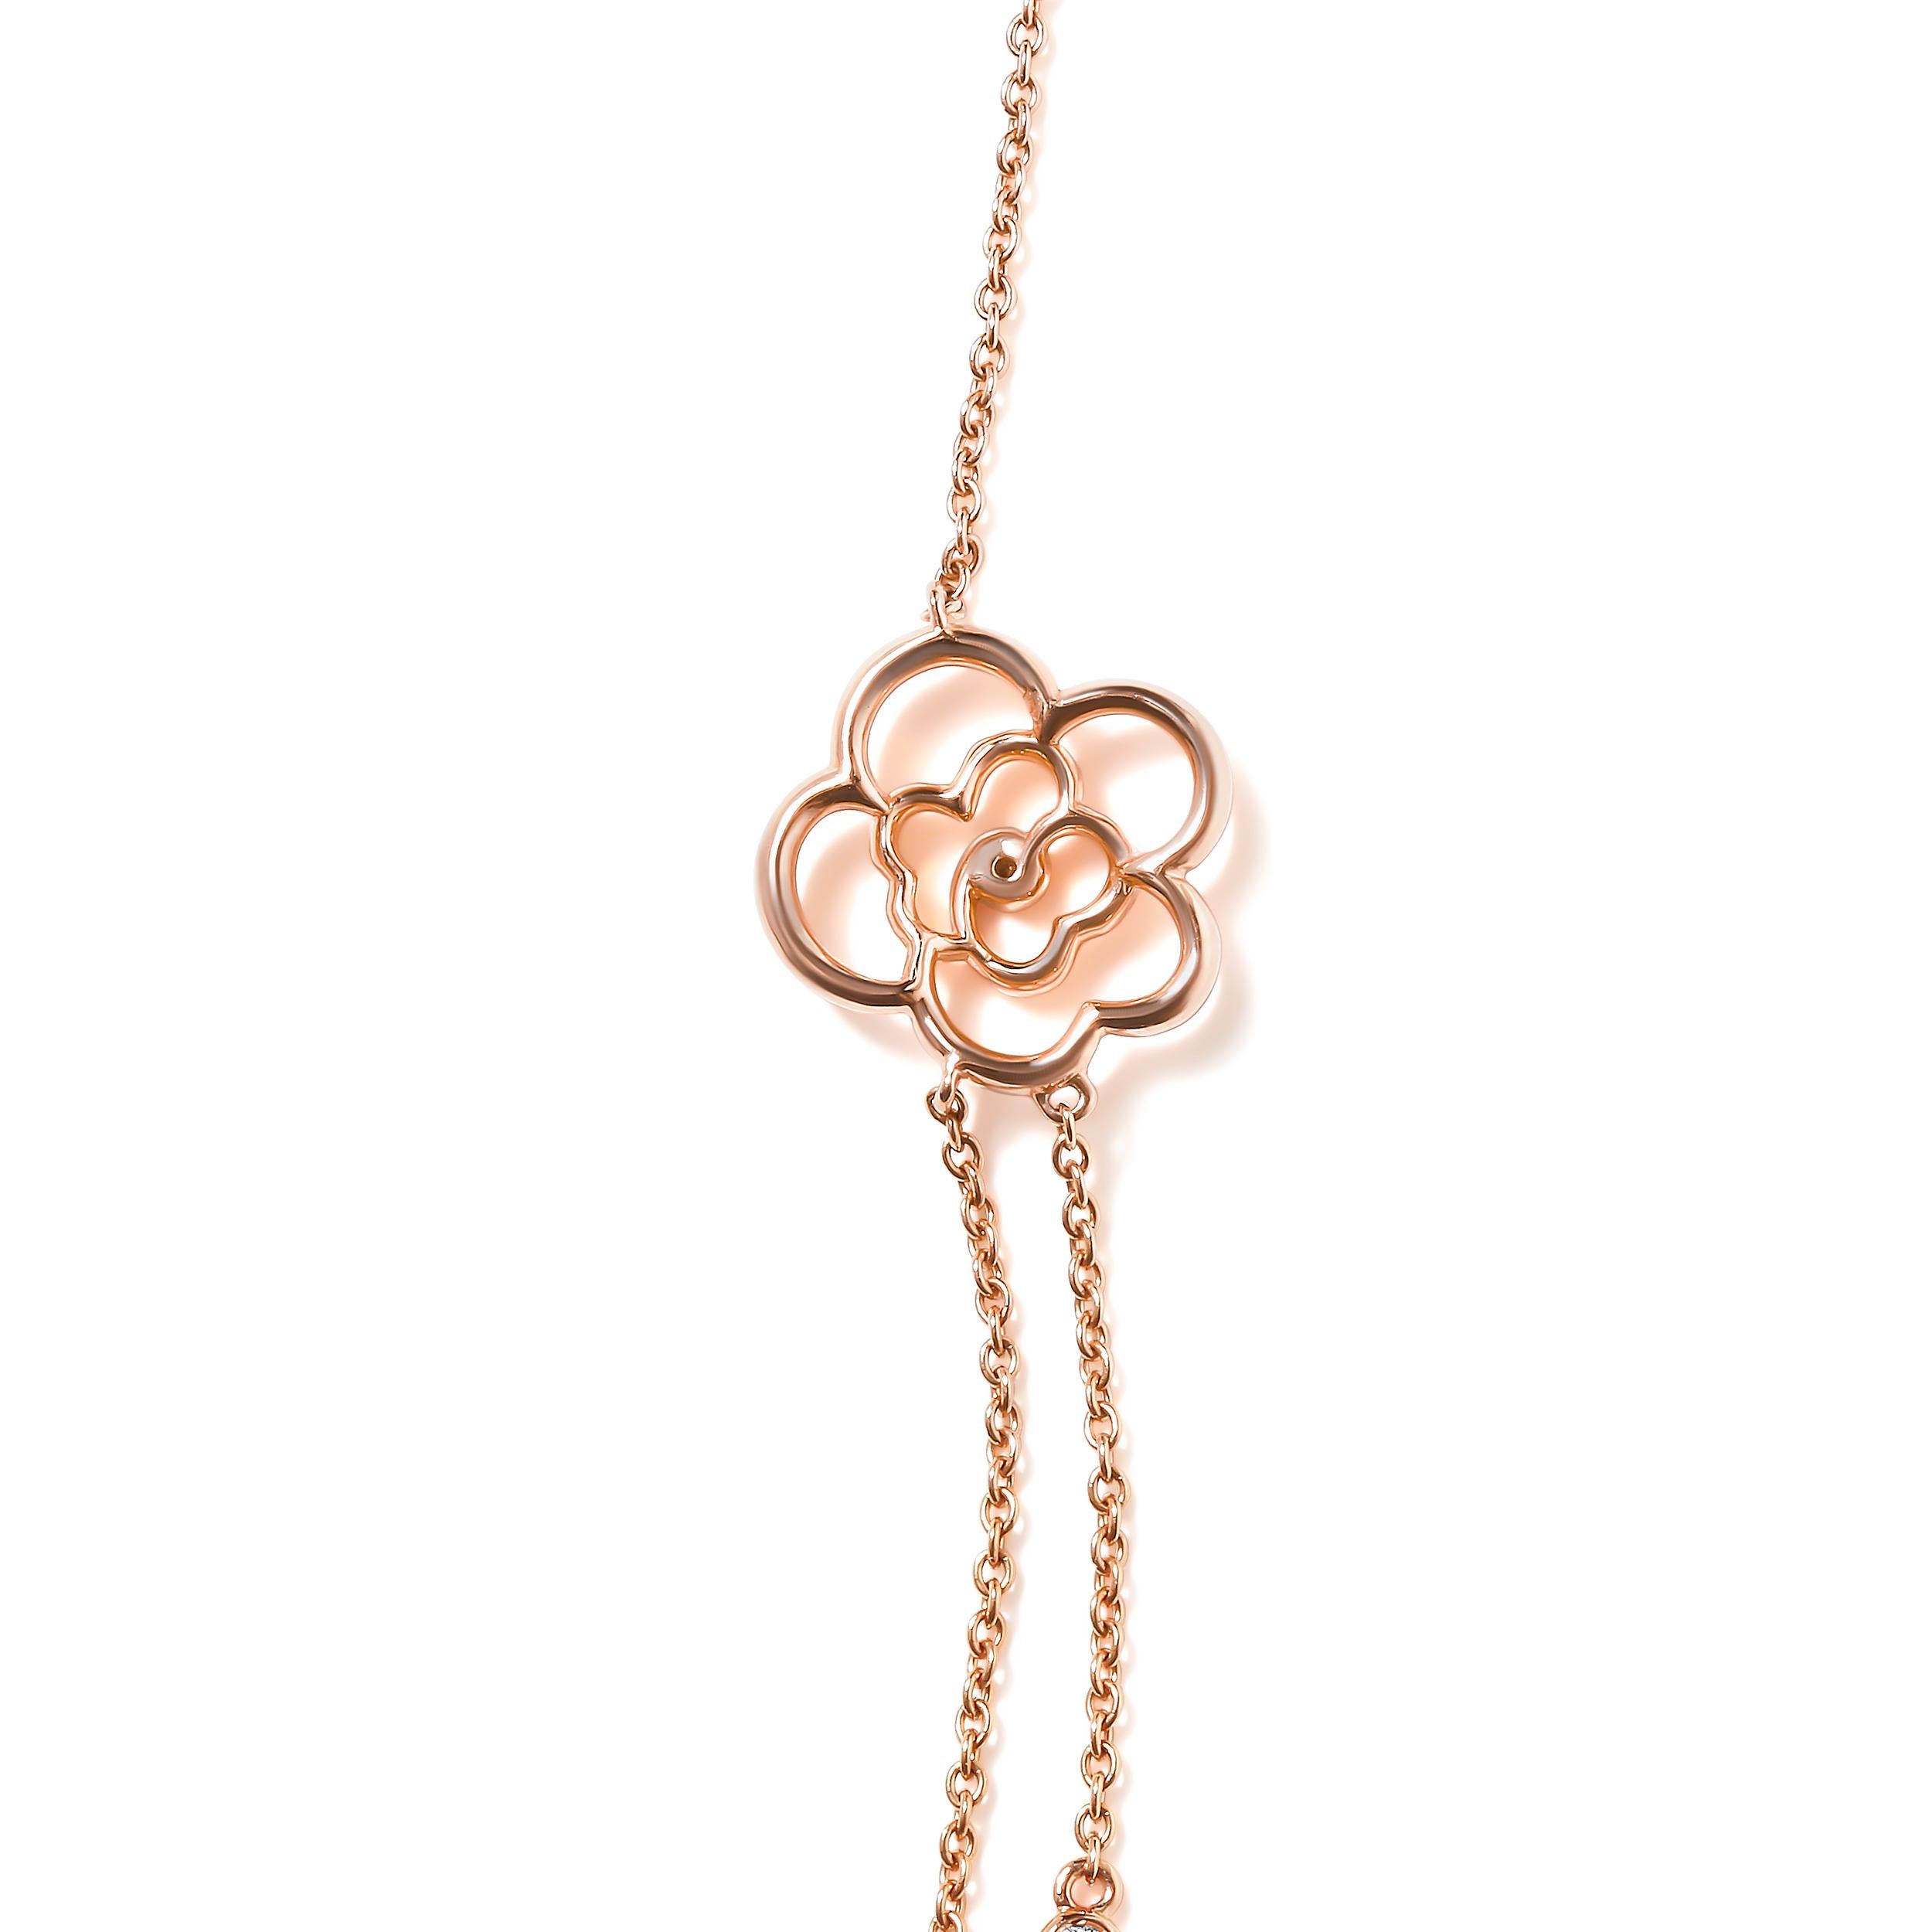 Diamonds and pearls are spaced along a delicate cable chain in this chic 18k rose gold station in a double strand design that can be worn with a variety of different styles. Multi-sized Chinese freshwater cultured round ivory pearls in cup settings